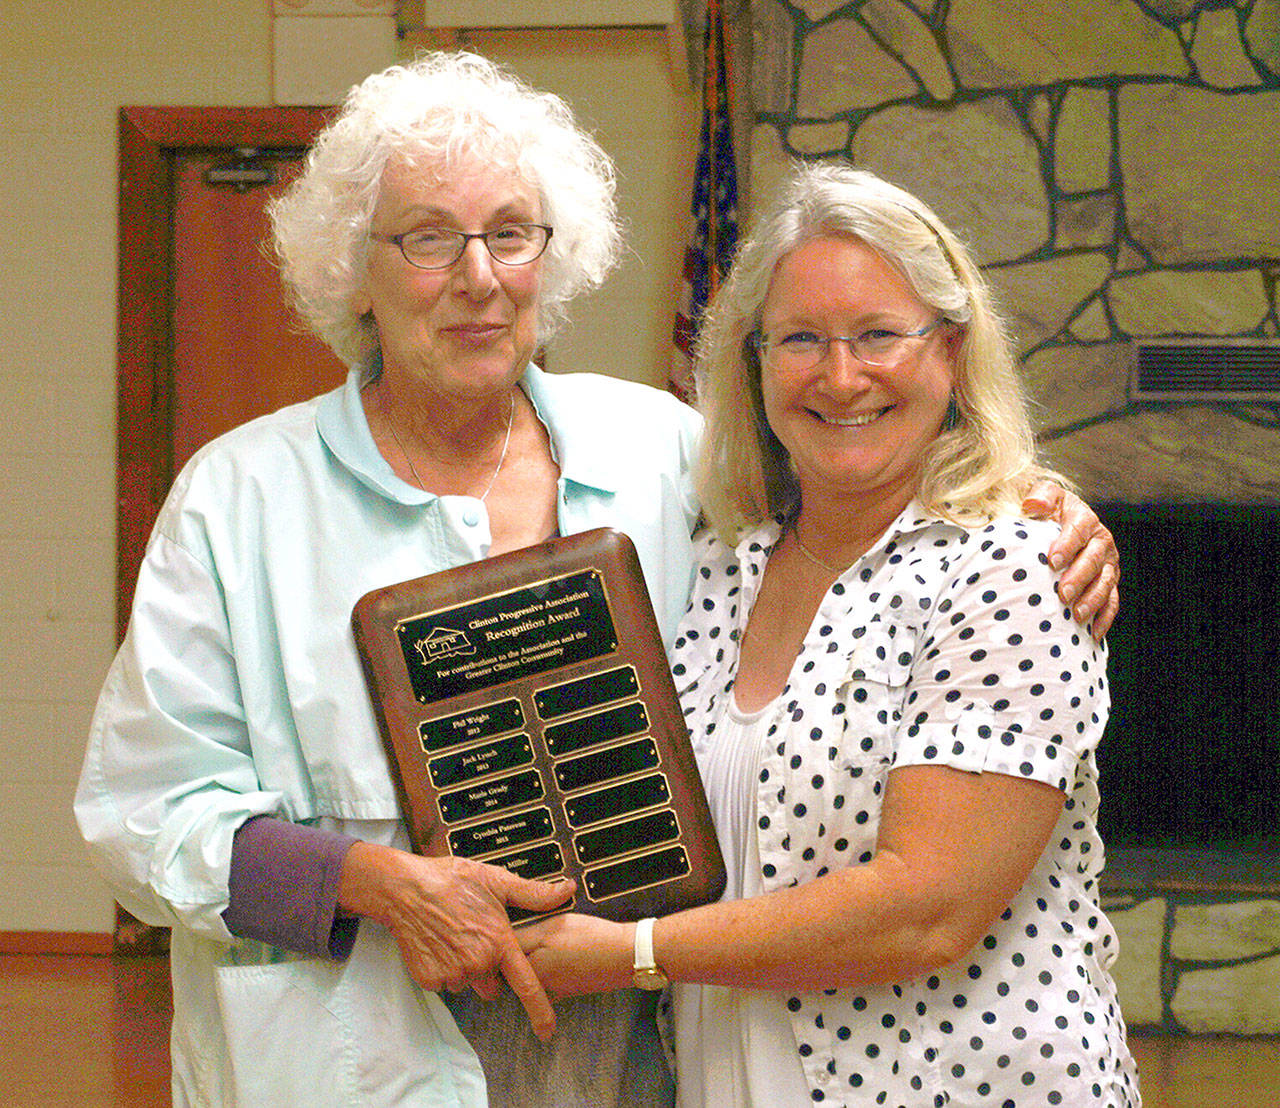 Contributed photo — Clinton resident Elisa Miller, left, received the volunteer of the year award from the Clinton Progressive Association in September. Catherine Billera, president of the Clinton Progressive Association, presented the award.